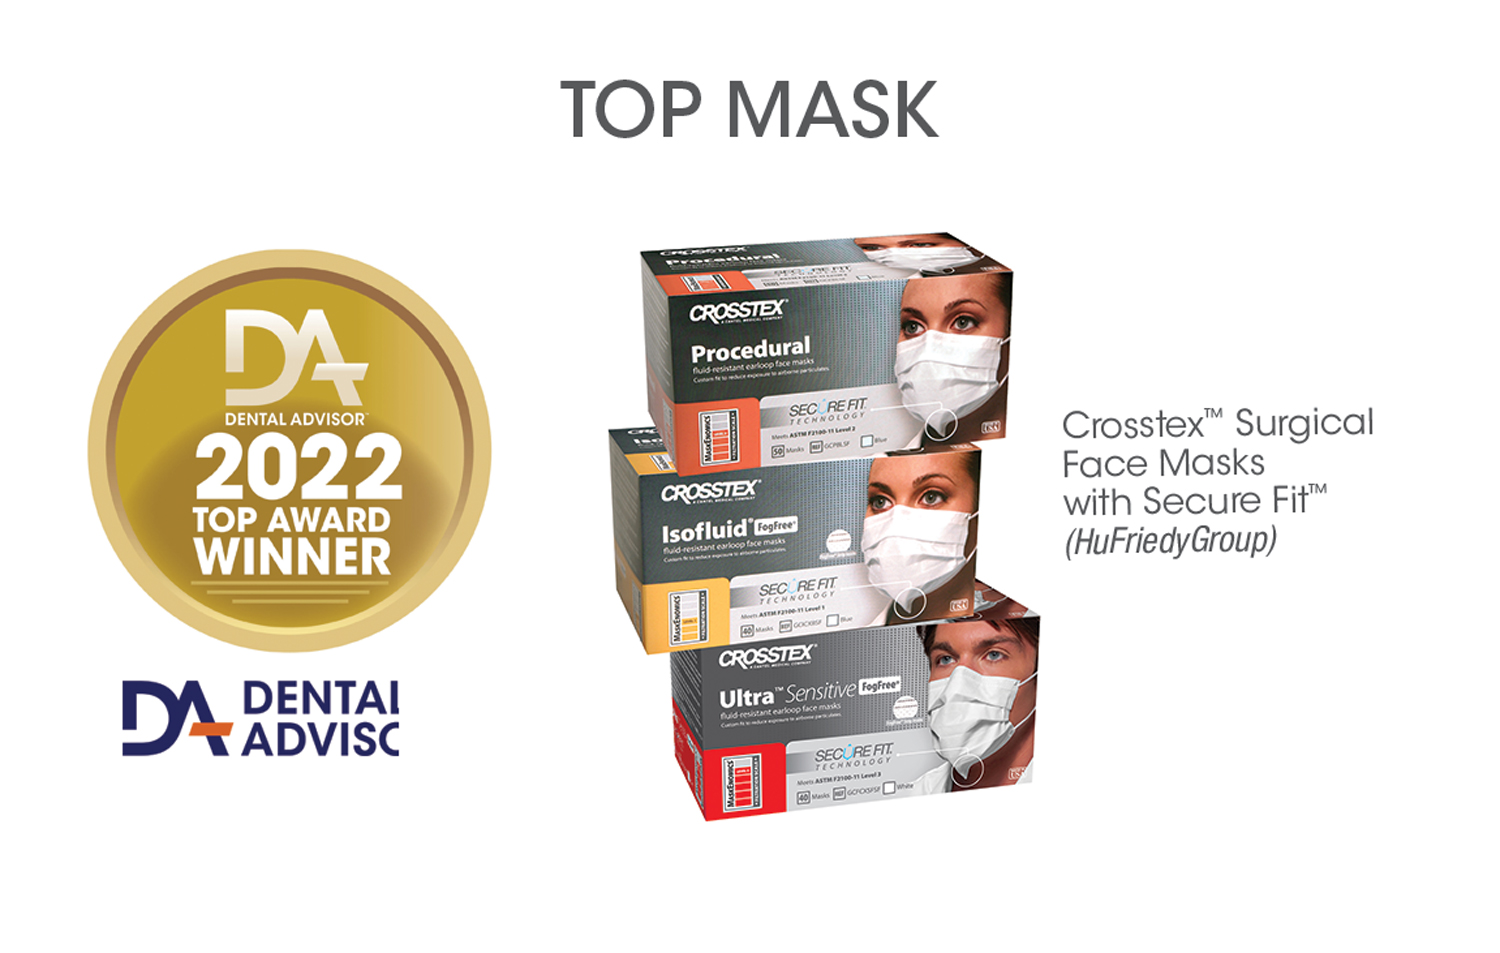 Crosstex Surgical Face Masks  with Secure Fit Technology